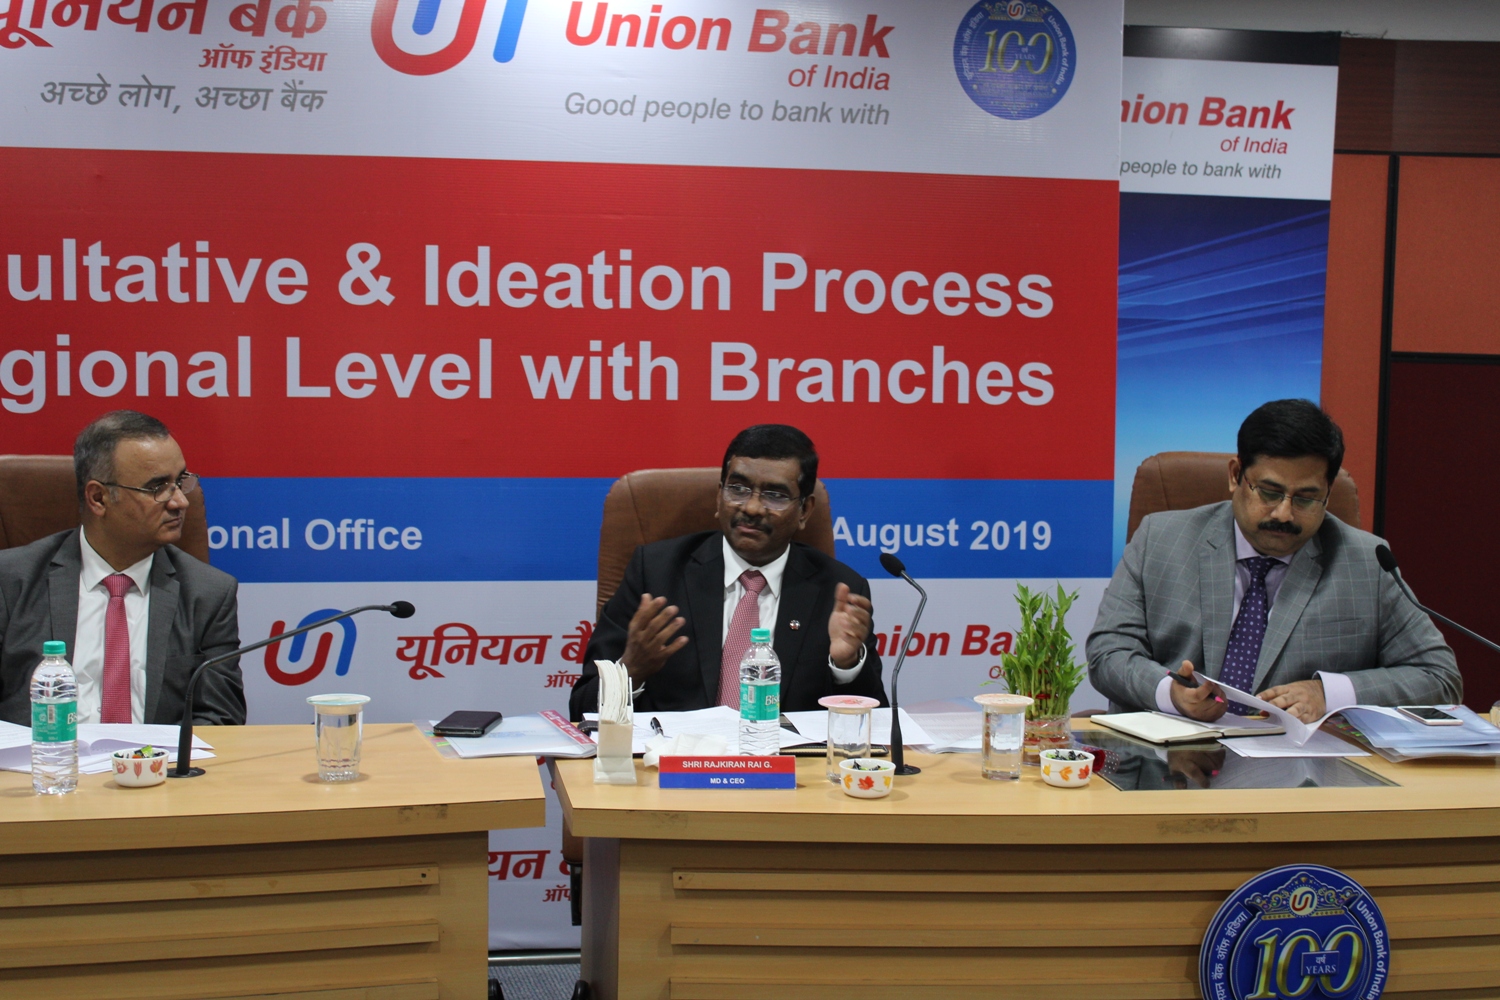 Mr. Rajkiran Rai G, MD & CEO, Union Bank of India (centre) along with Mr. Amarendra Kumar, Regional Head, Mumbai - West), Union Bank of India (left) Nitesh Ranjan, GM-Corporate Office, Union Bank of India, (right) Regional Office, Mumbai (West) at the collective consultative and ideation process conducted by Union Bank of India on 17th & 18th August 2019. The Regional Office Mumbai (West) meeting of all branch heads was held at the Union Bank of India Powai DIT Building on Sunday, 18th August 2019.